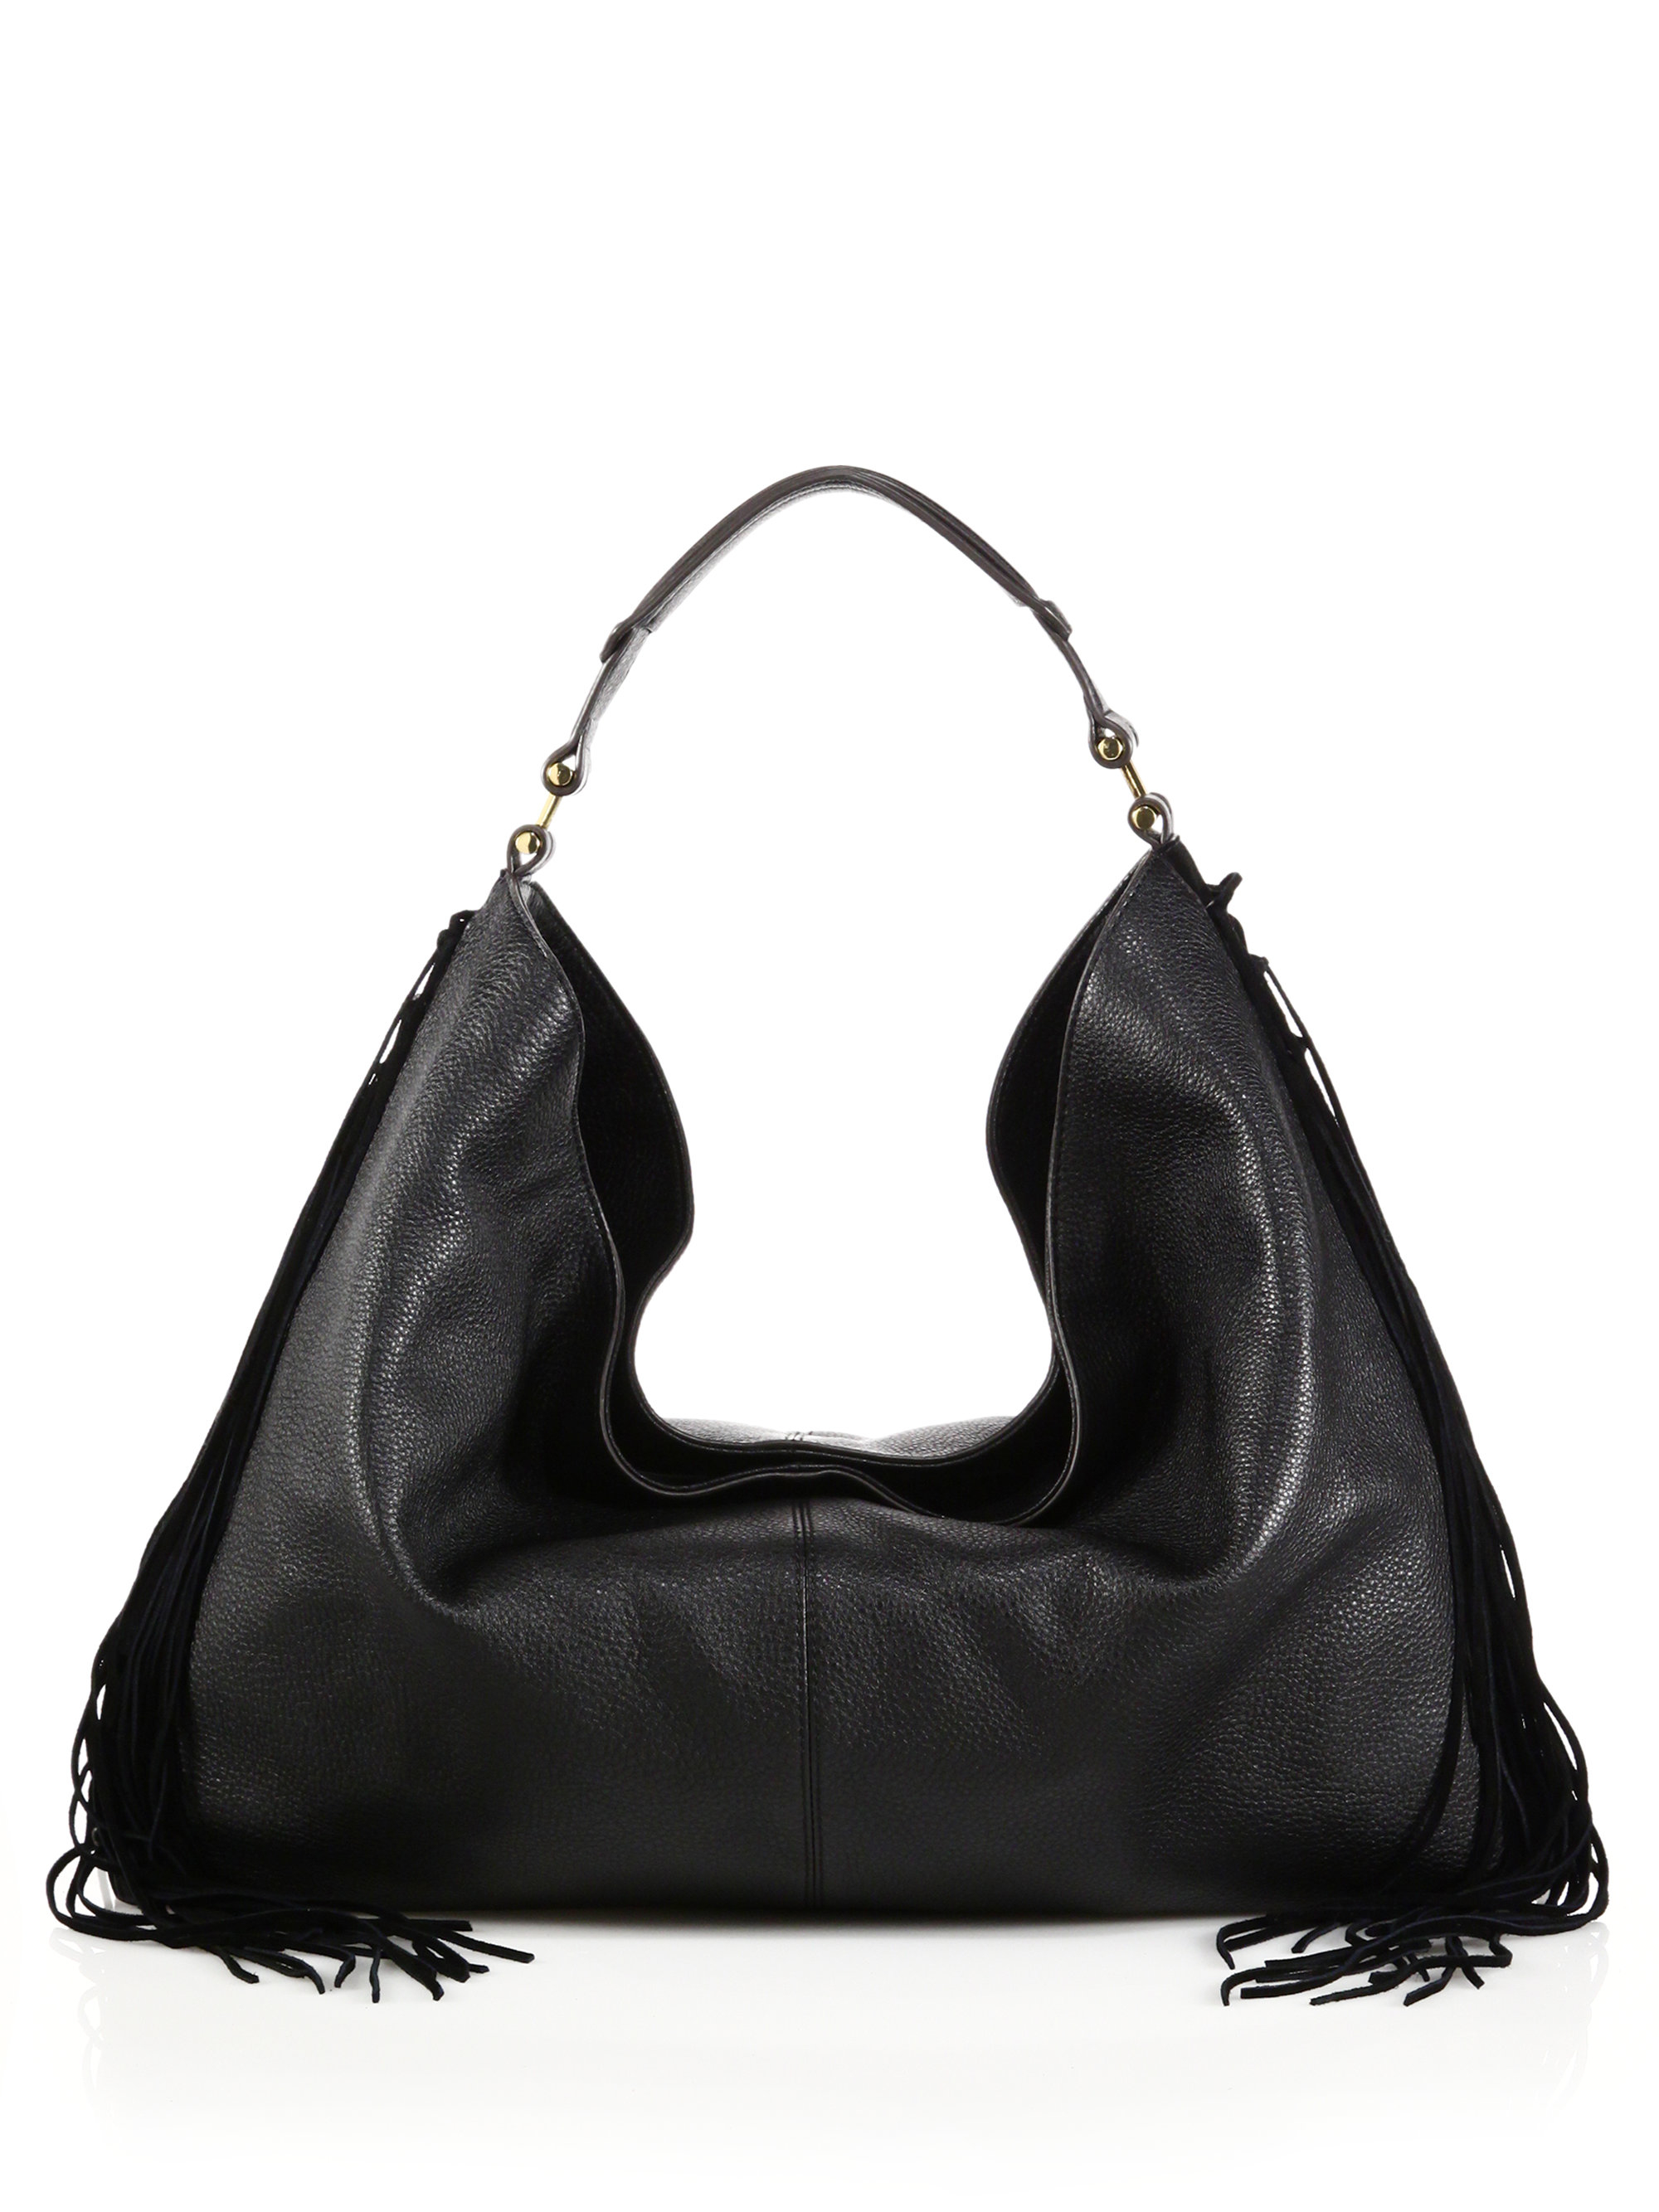 Lyst - Rebecca Minkoff Heavy Laced Oversized Fringed Leather & Suede Hobo Bag in Black